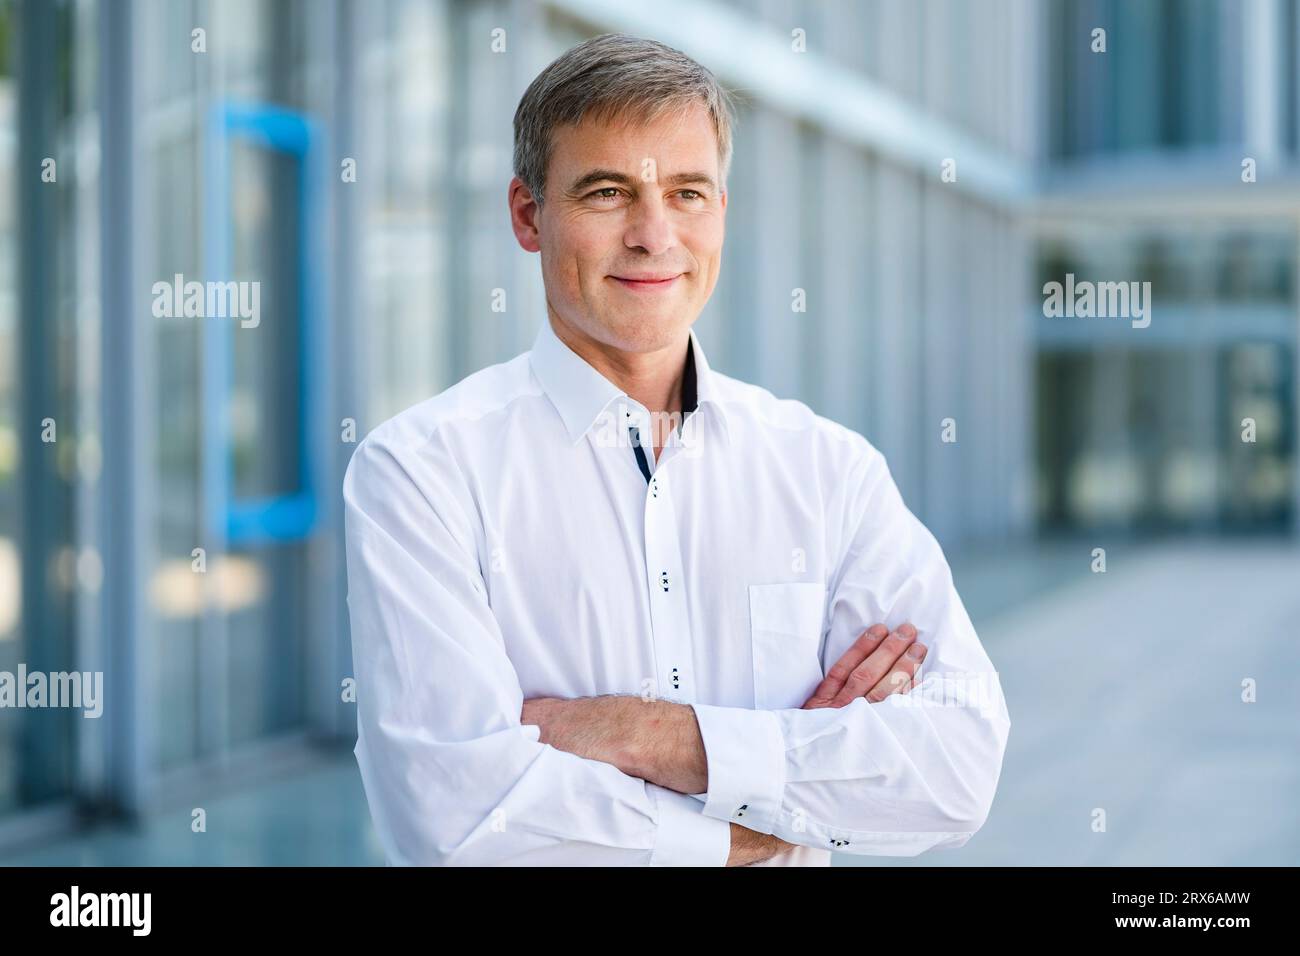 Casual businessman standing in front of office building with arms crossed Stock Photo